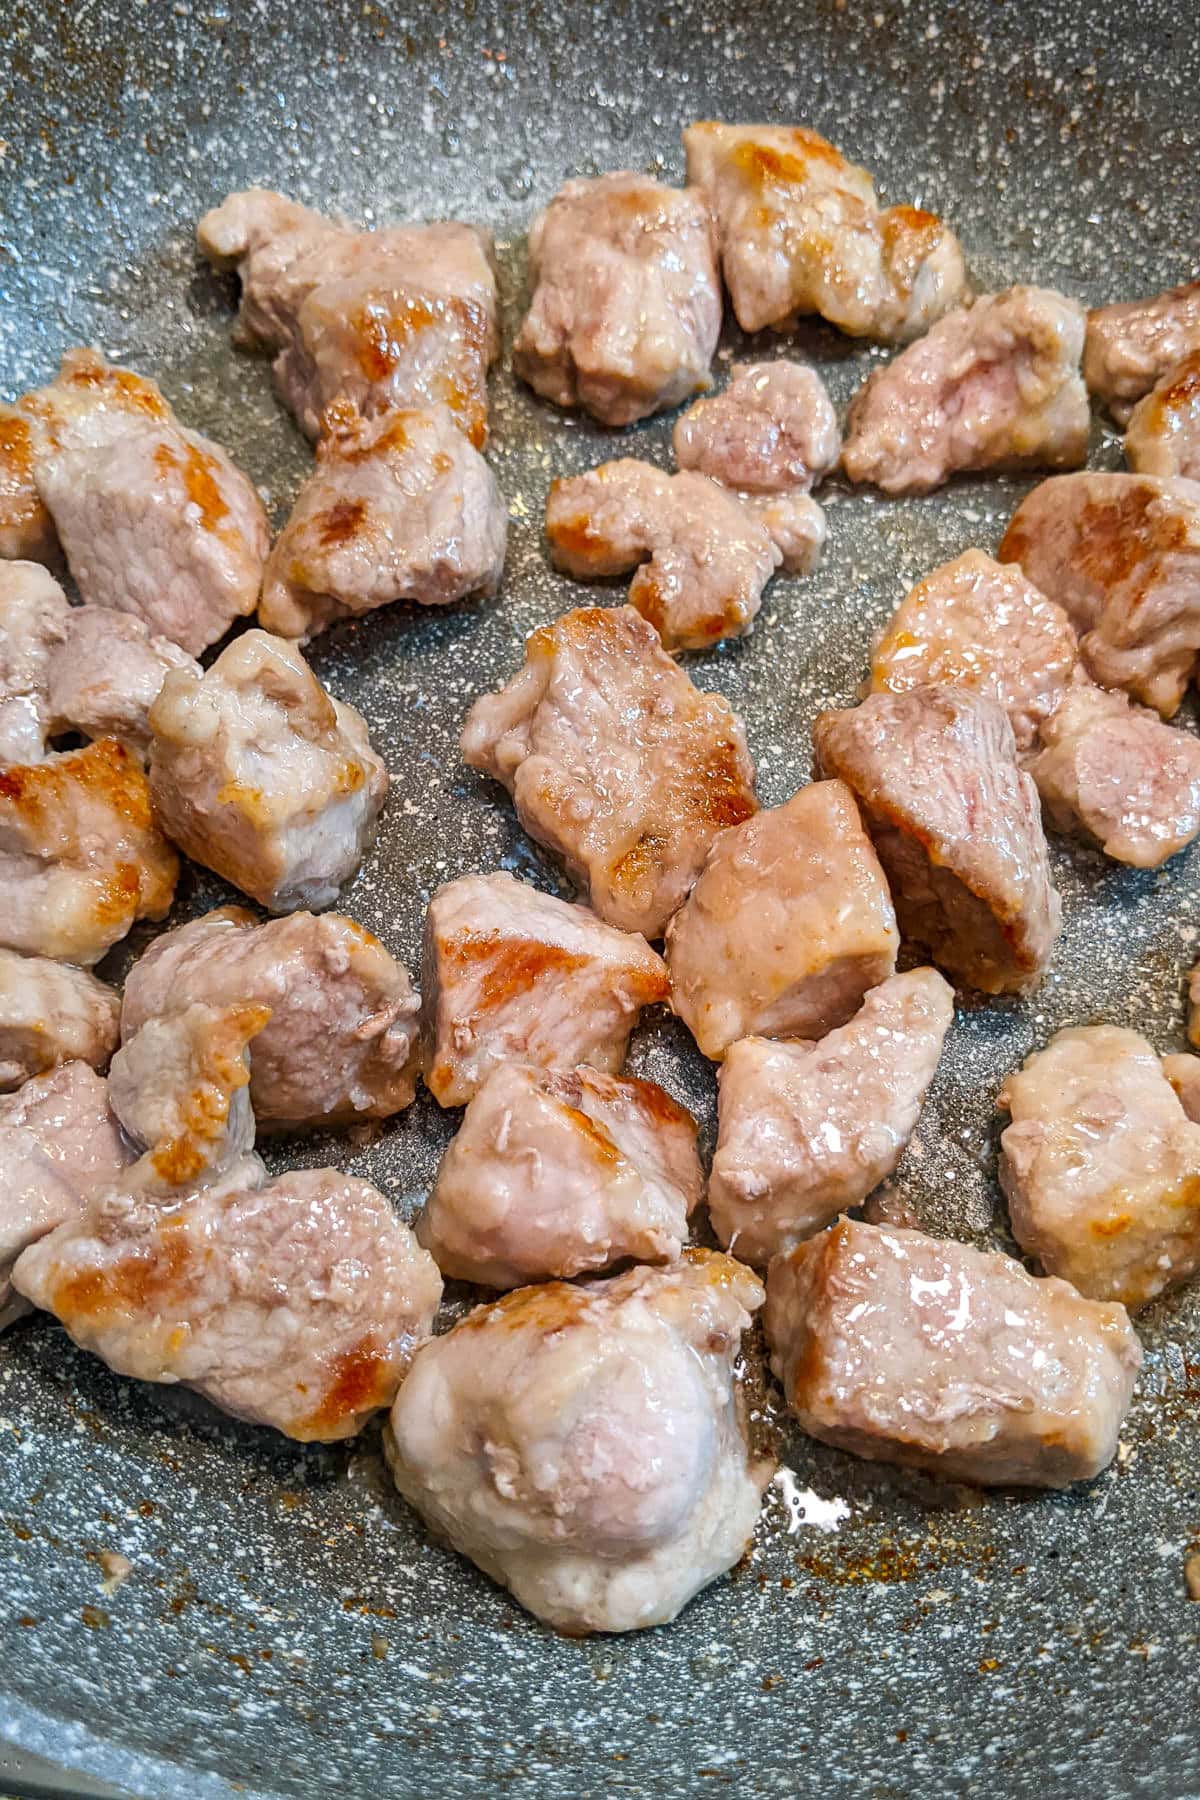 Top view of fried meat on a pan.